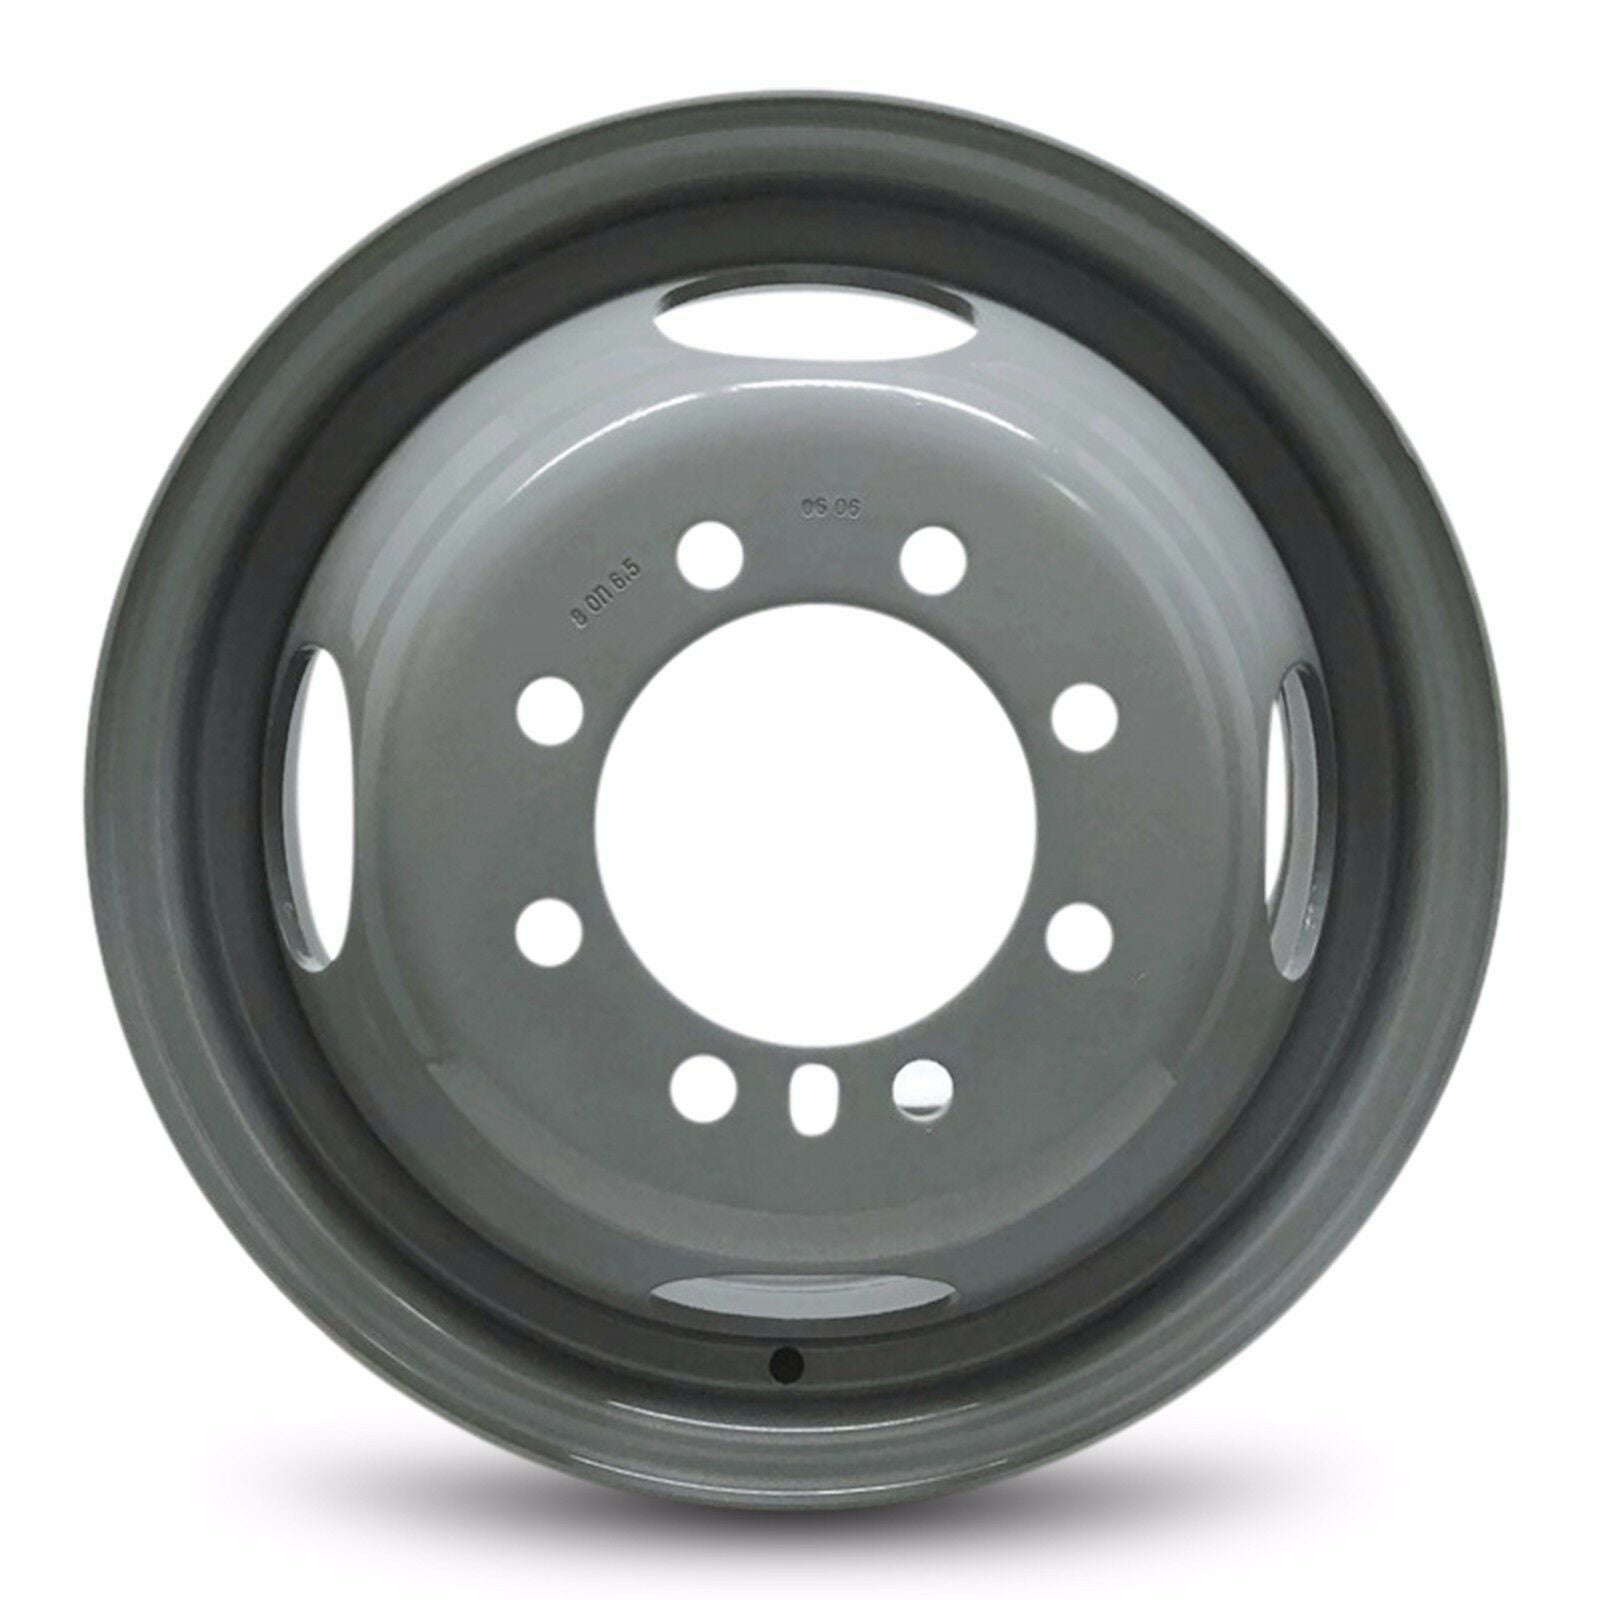 Exact OEM Replacement Full-Size Spare Road Ready Car Wheel for 1985-1997 Ford F350 16 Inch 8 Lug Gray Steel Rim Fits R16 Tire 